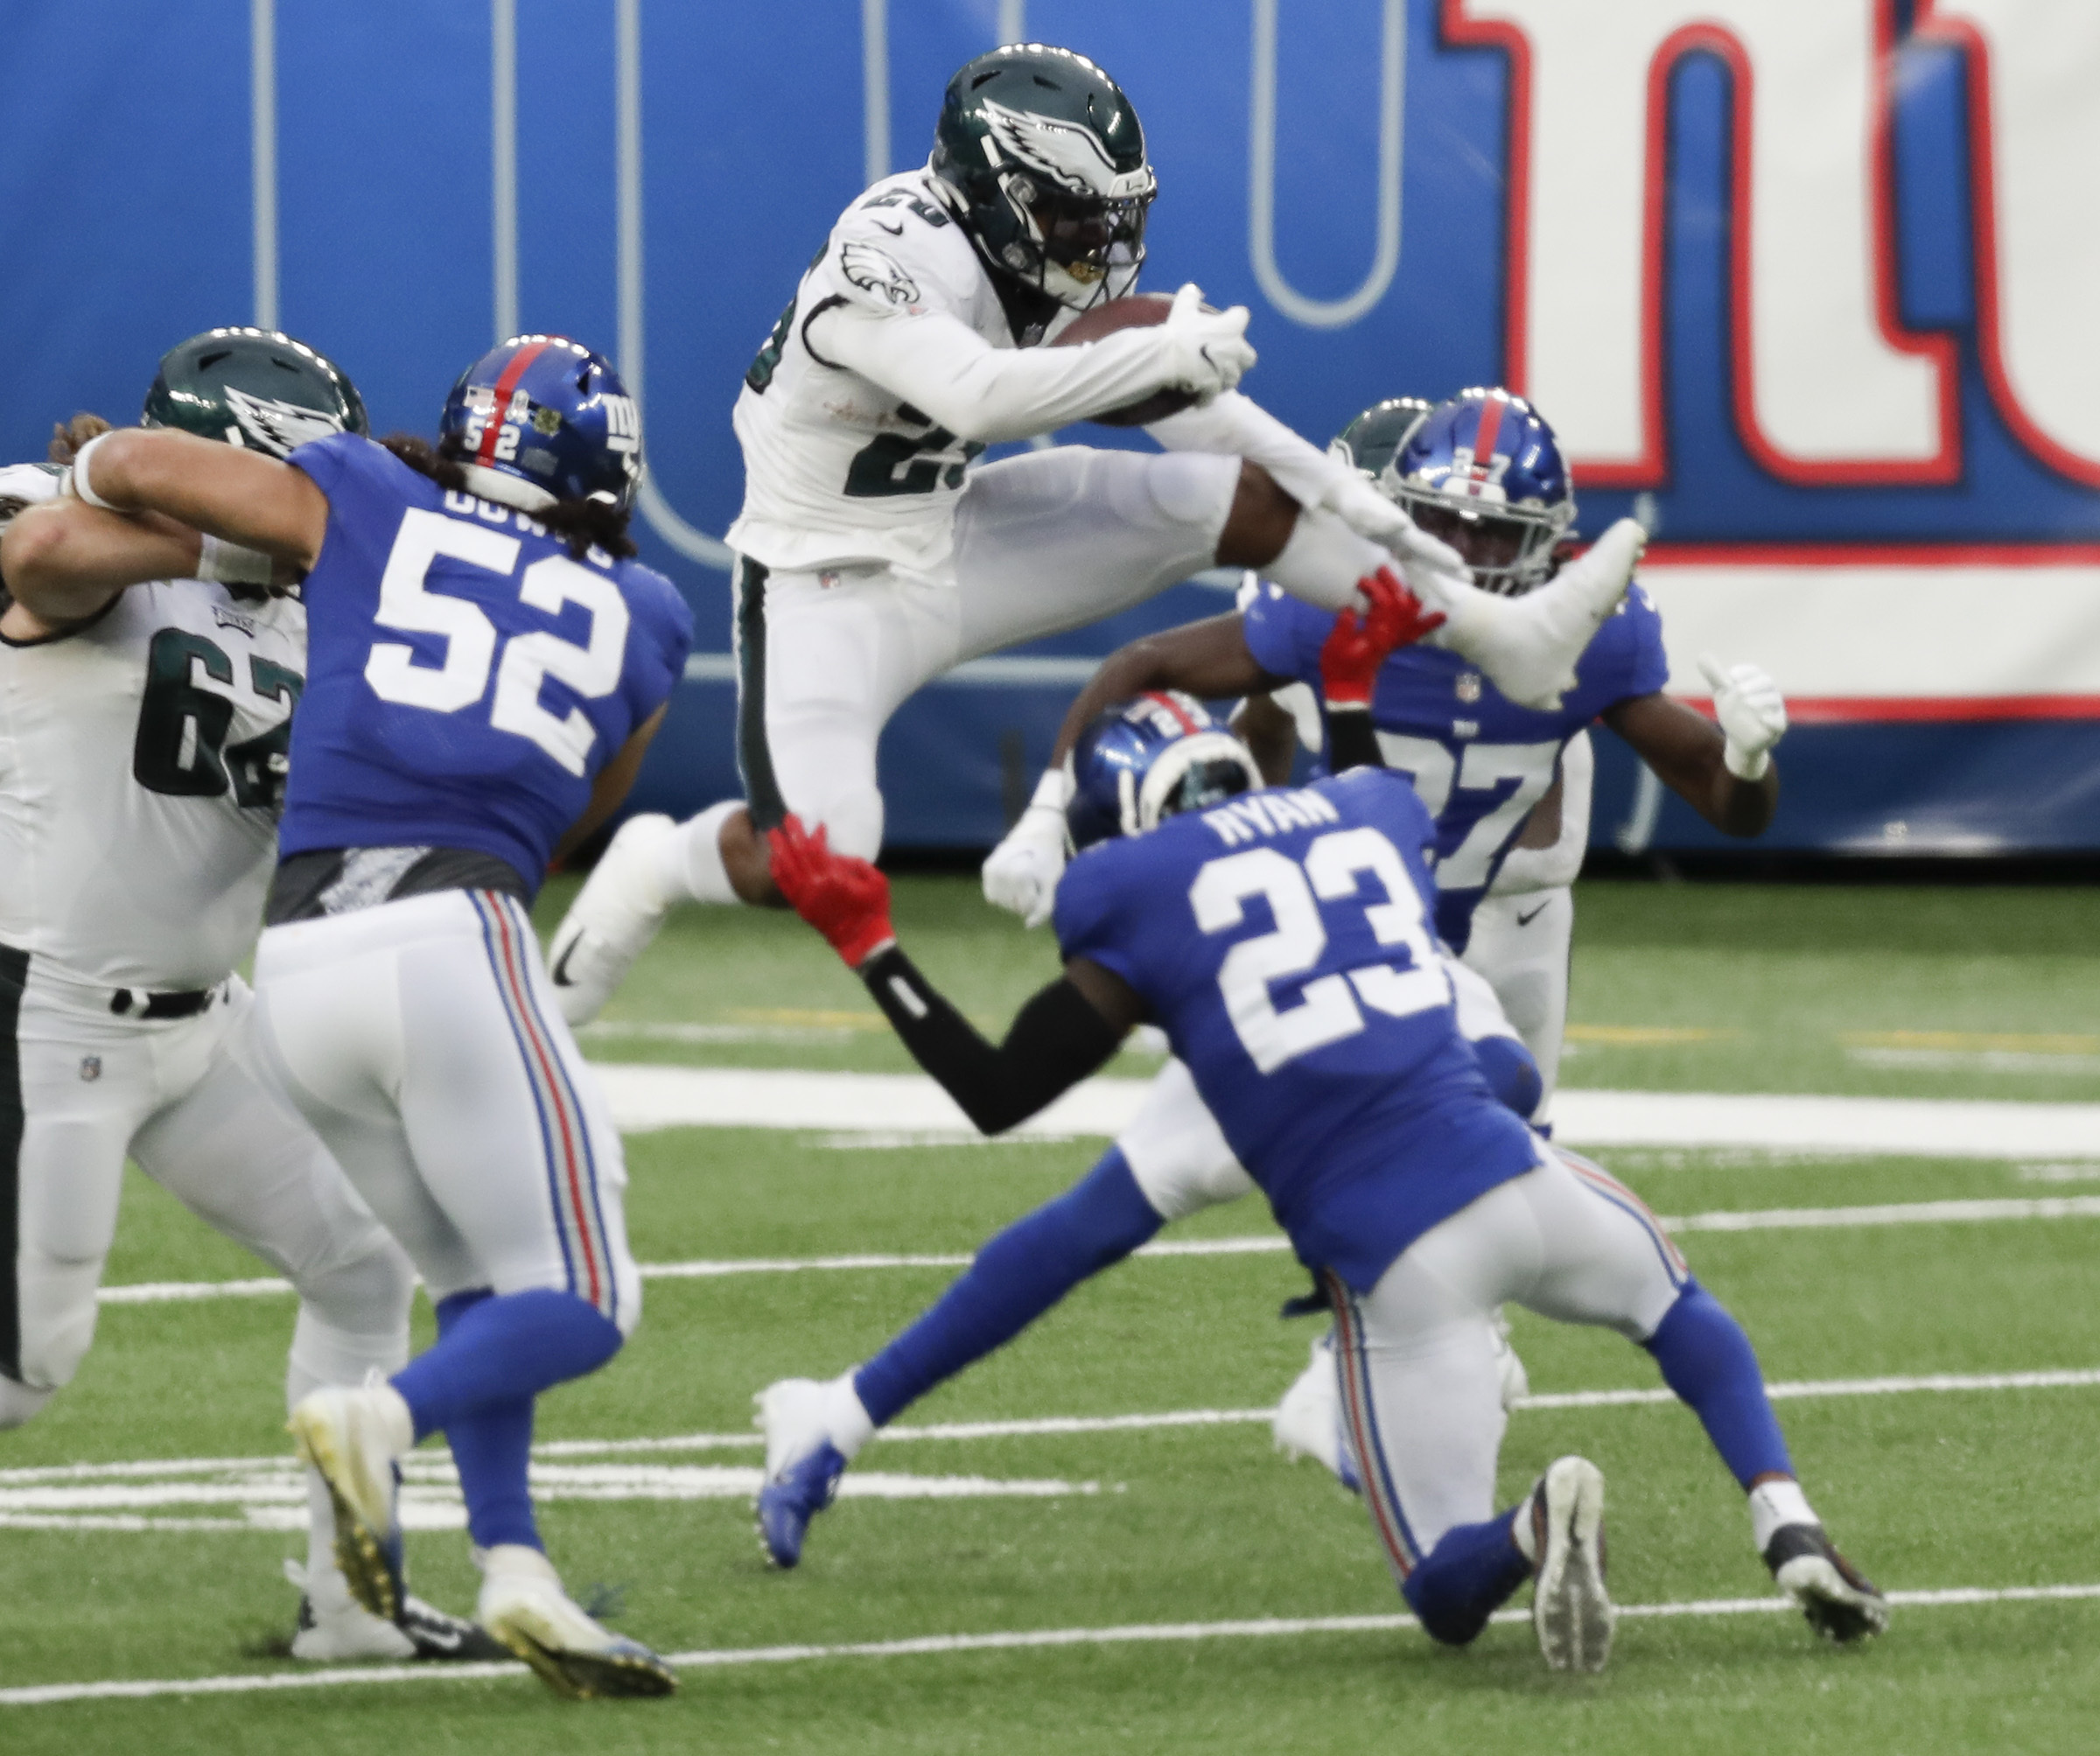 Giants-Eagles Final Score: New York wins crucial game against Philly, 27-17  - Big Blue View